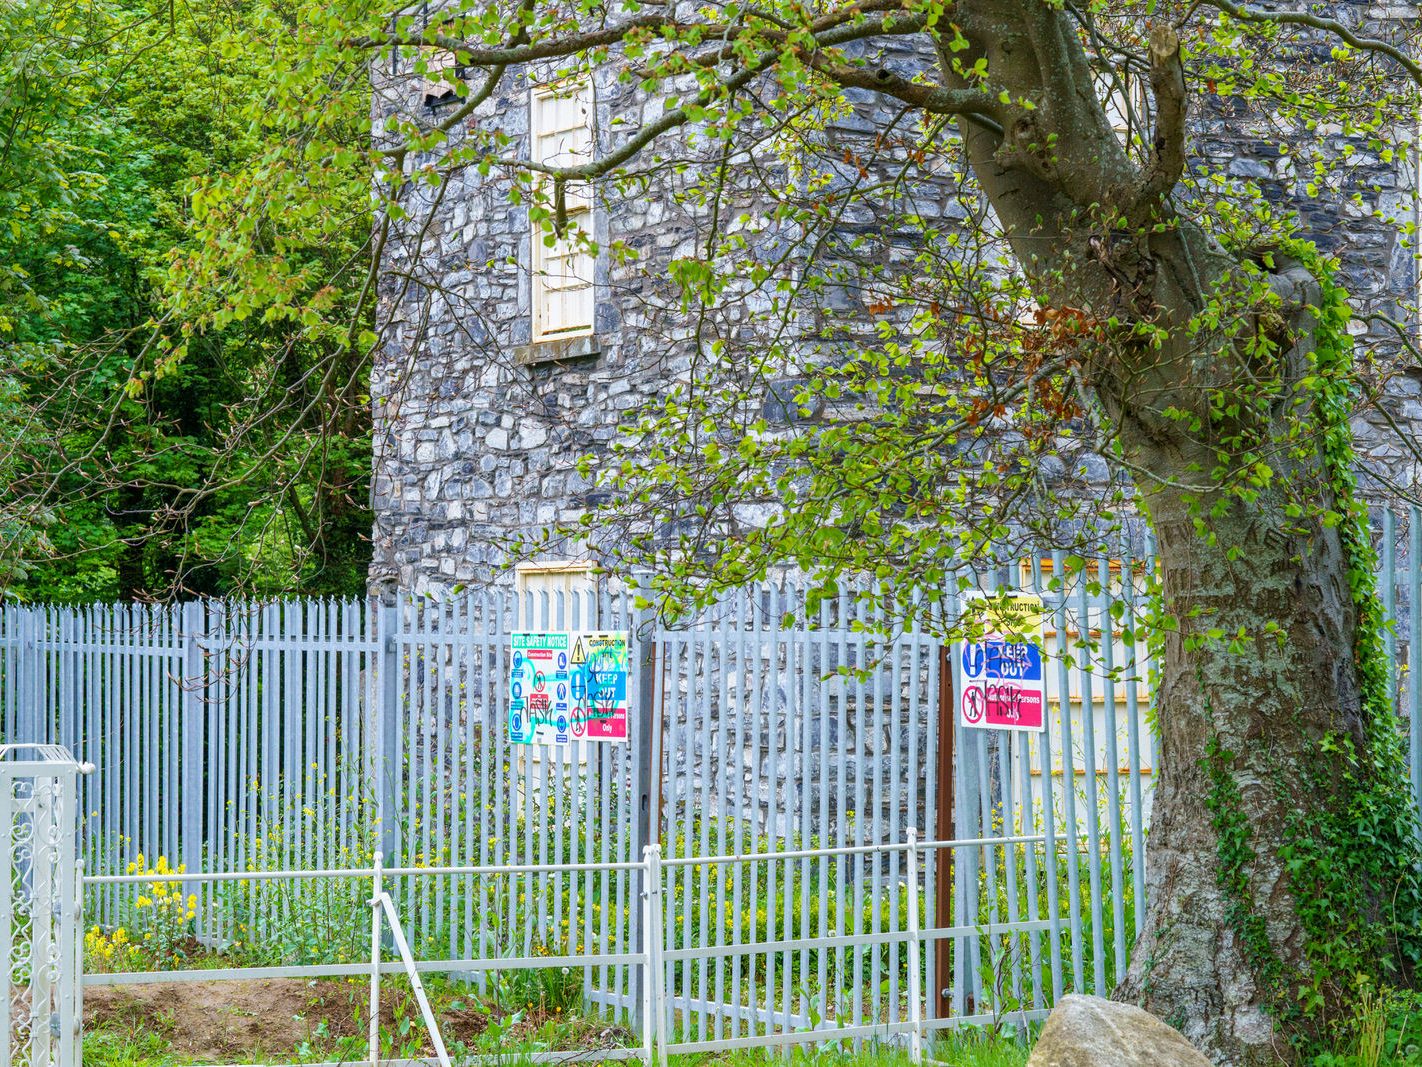 NEAR FARMLEIGH BRIDGE AND THE OLD HARRIS'S HOUSE [TWO DERELICT STRUCTURES AT WATERSTOWN PARK IN PALMERSTOWN]-232572-1